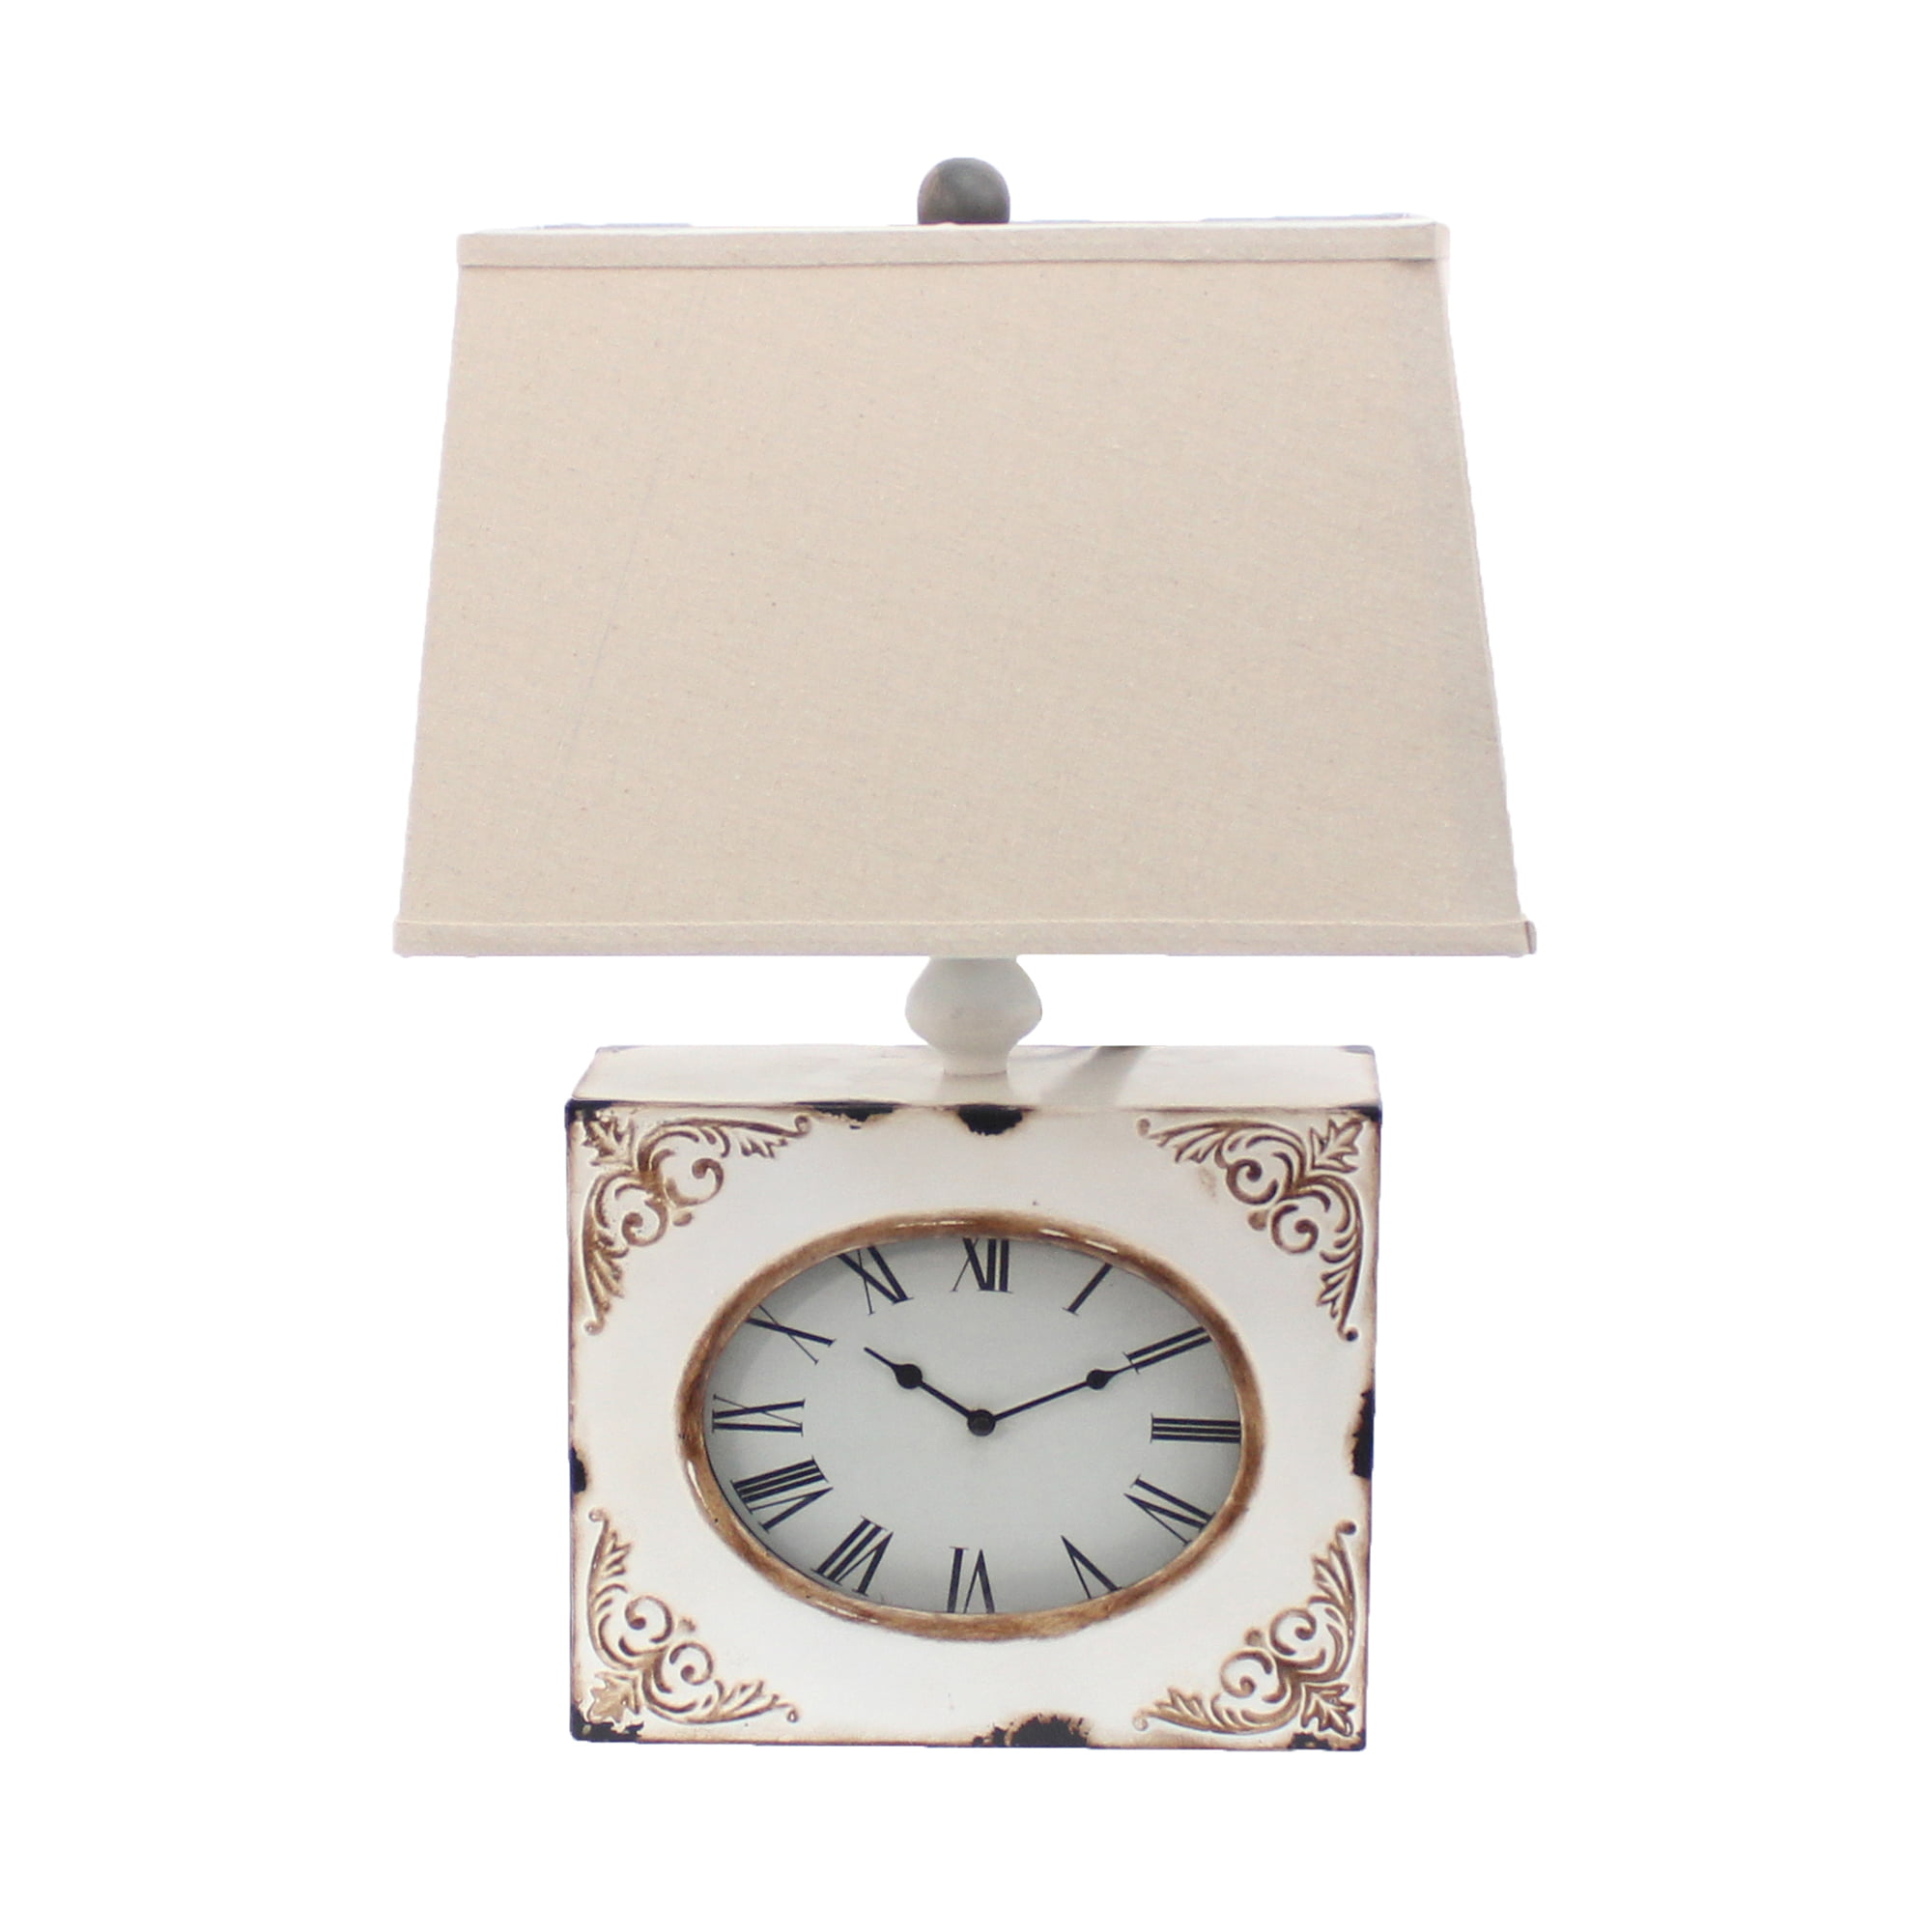 Table Lamp With Metal Clock Base, Table Lamp With Clock